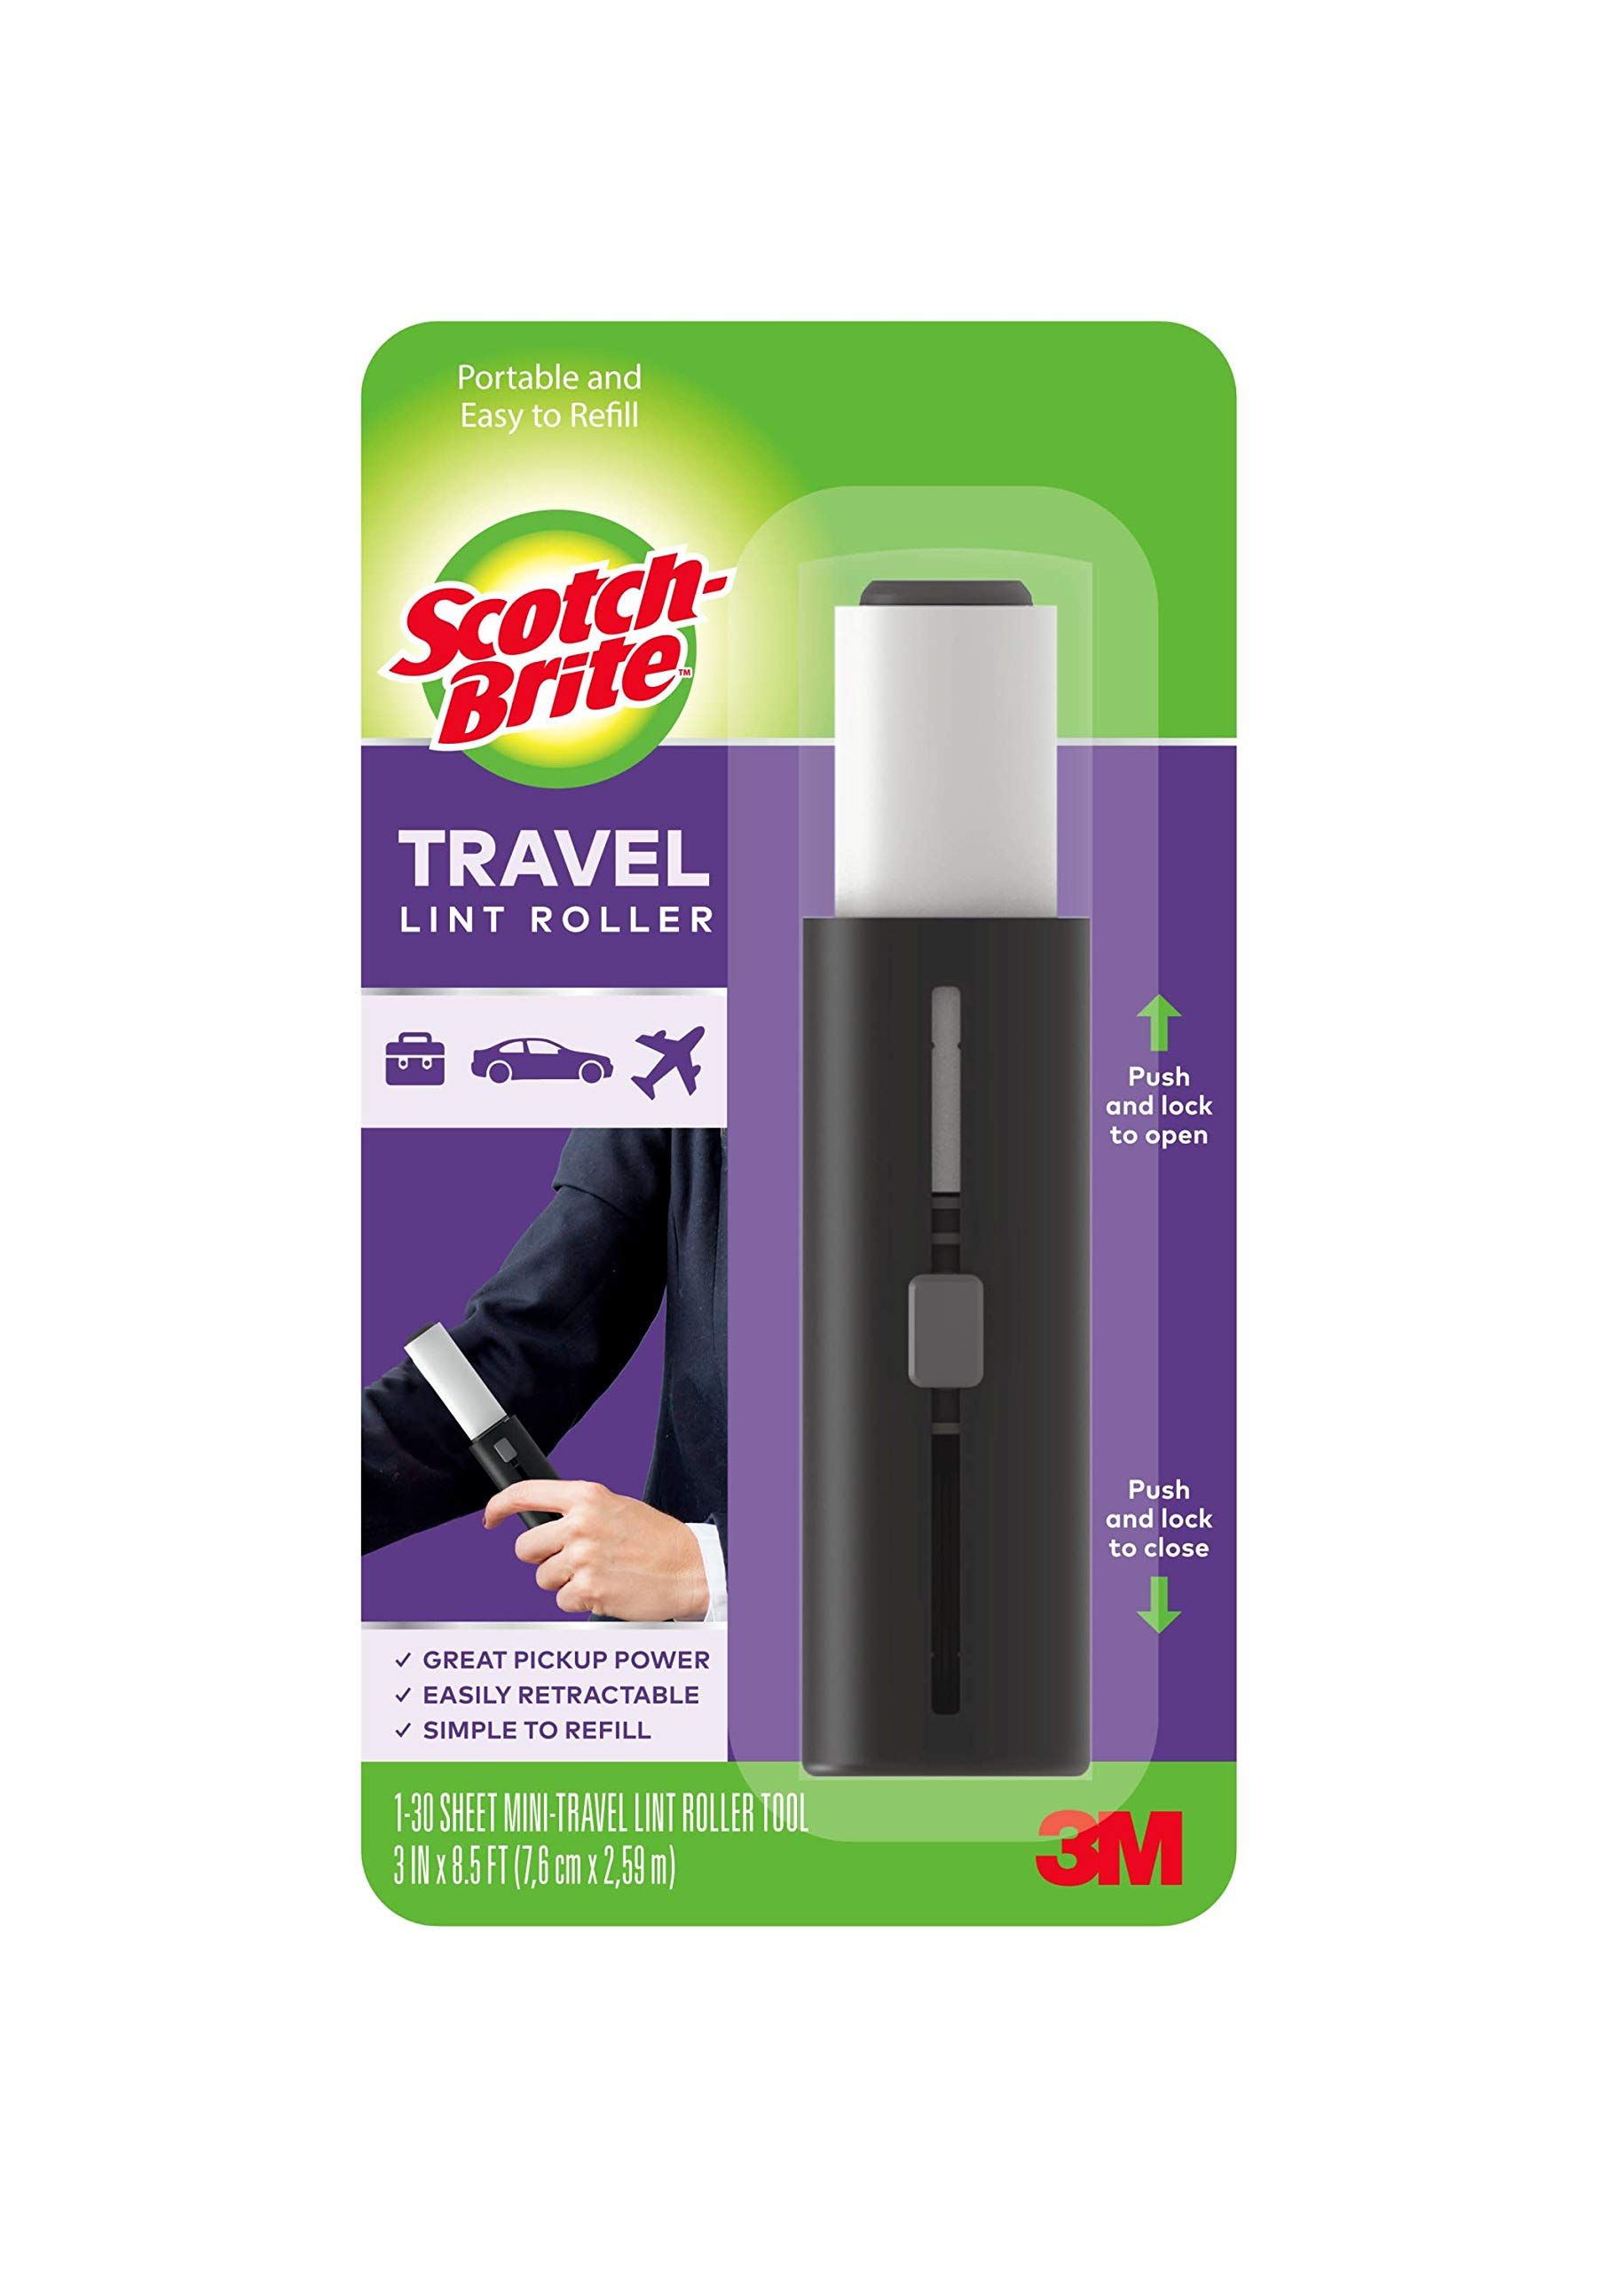 Scotch-Brite Mini Travel Lint Roller, Works Great On Pet Hair, 30 Sheets | Amazon (US)